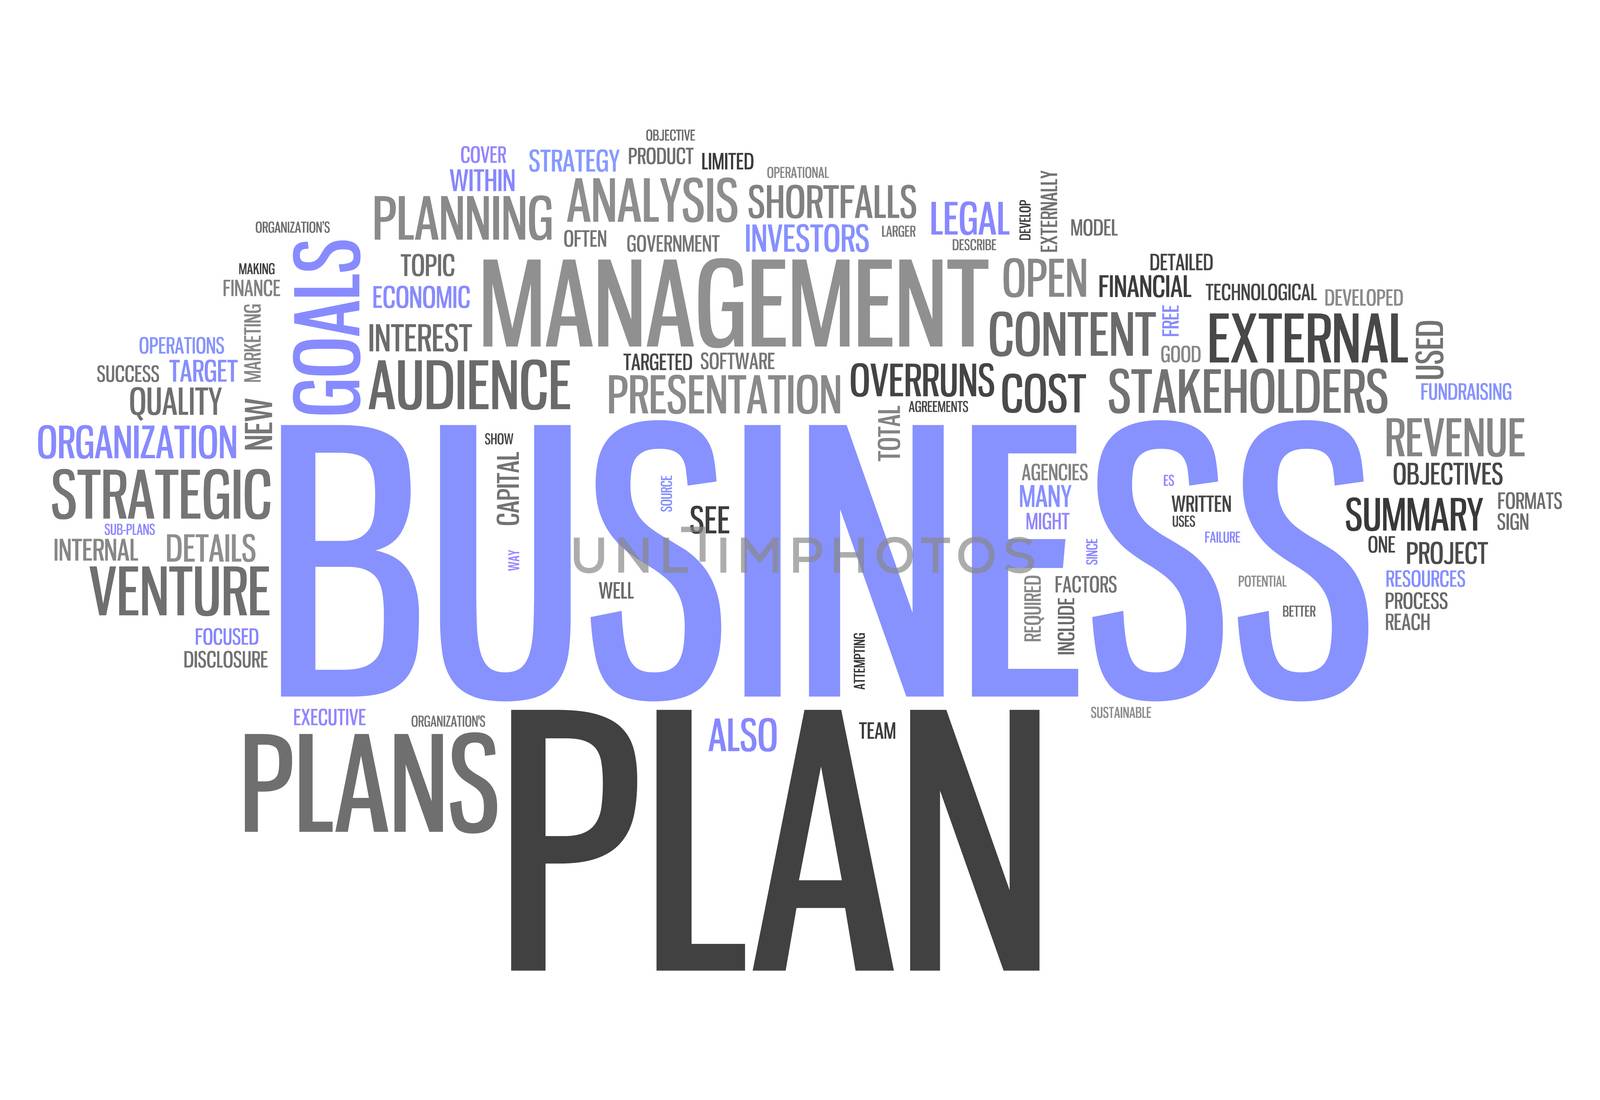 Word Cloud with Business Plan related tags